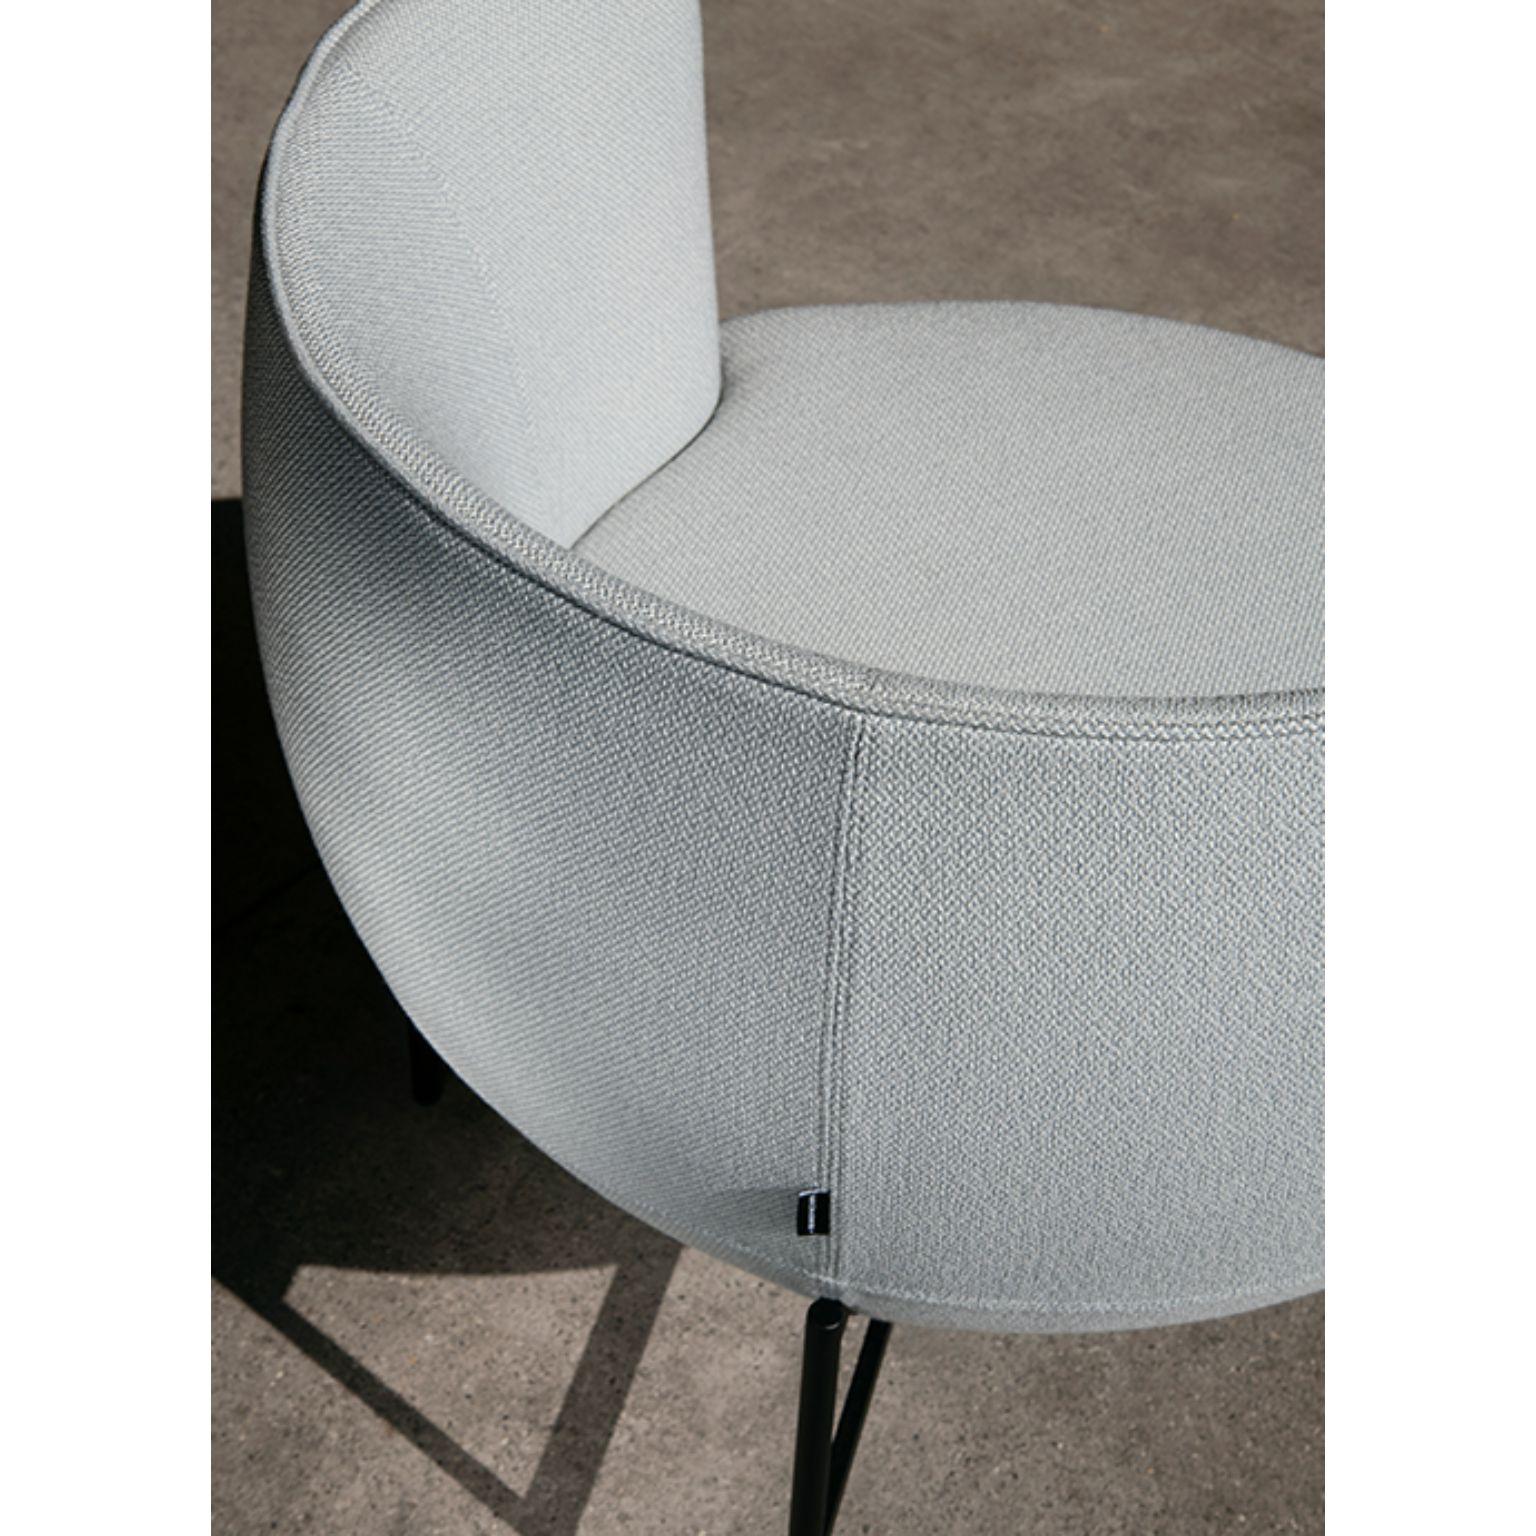 Modern Calice Armchair by Patrick Norguet For Sale